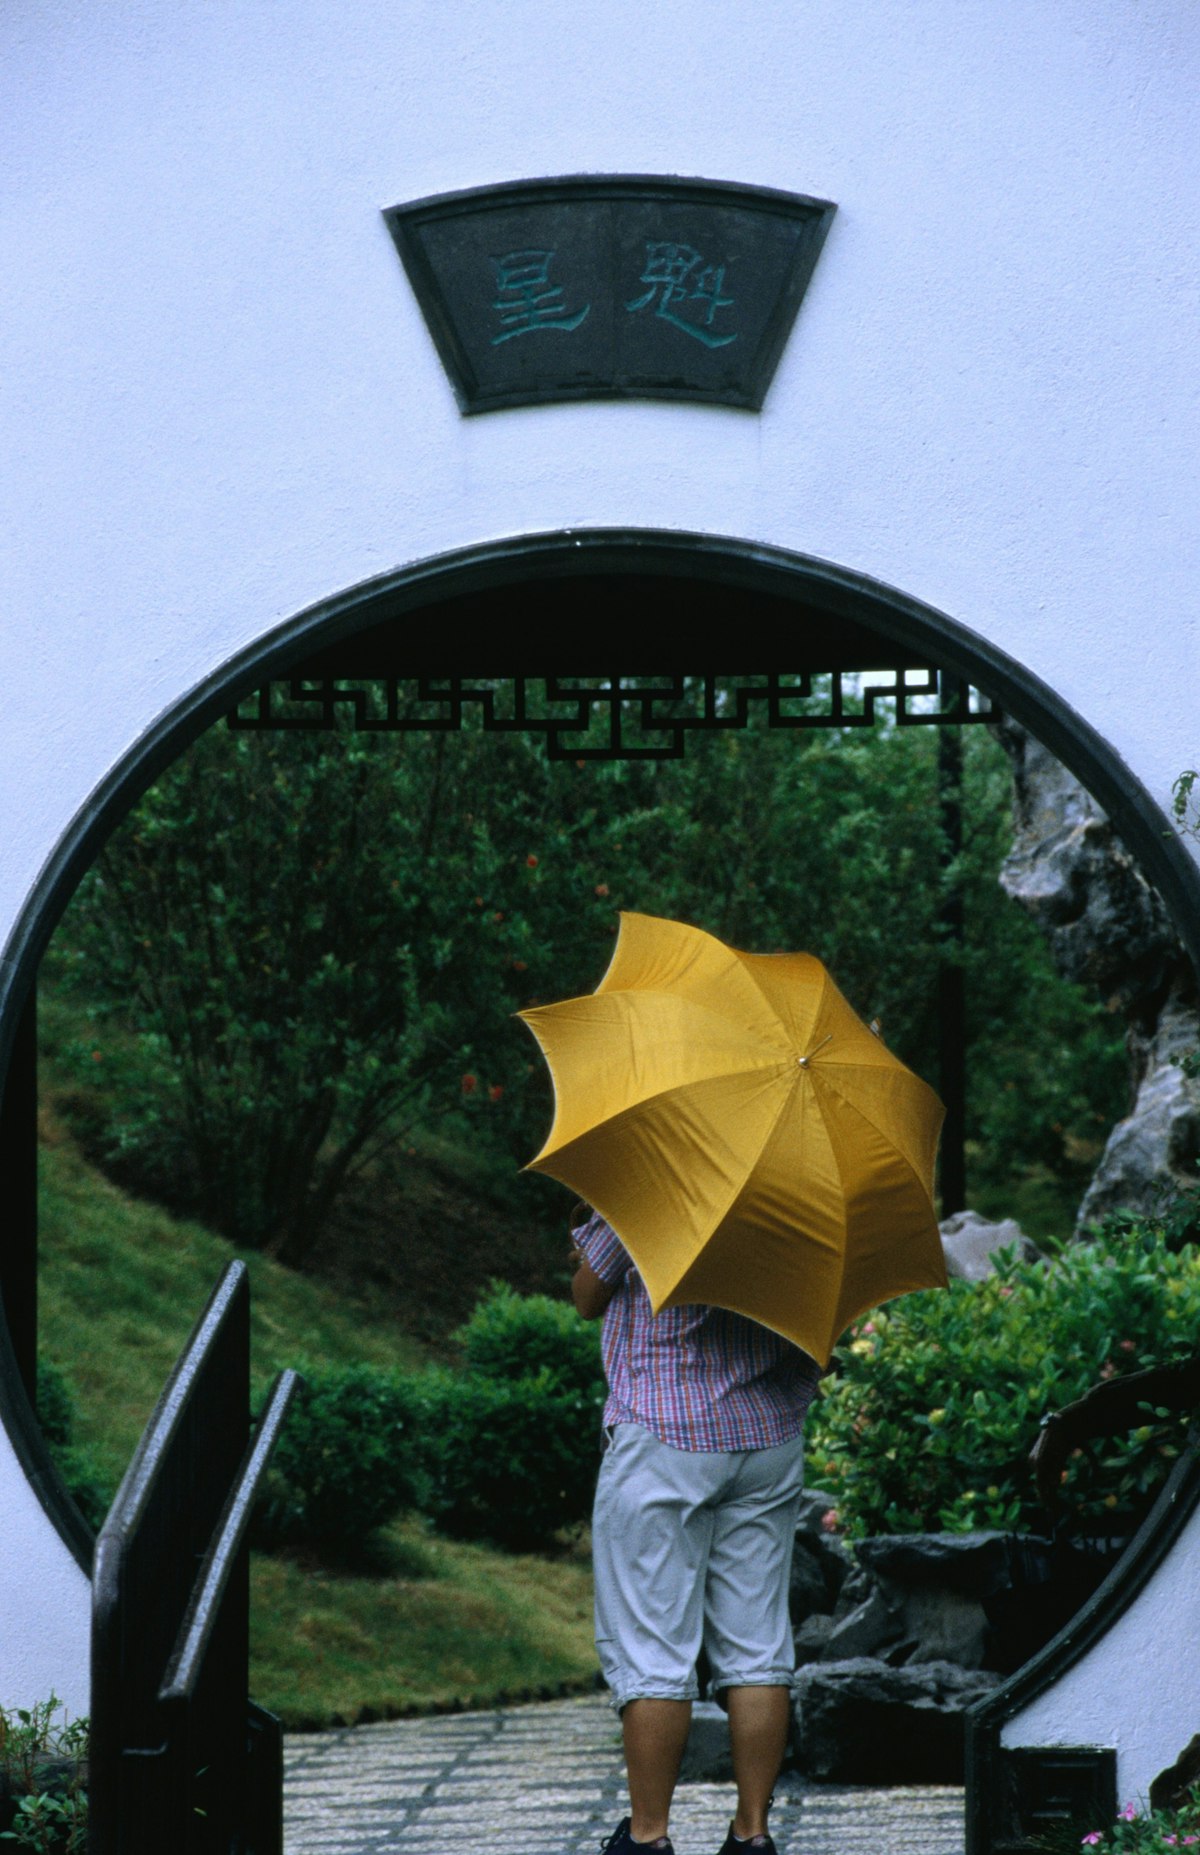 A visitor to the Kowloon walled city park walks through the Moon Gate.